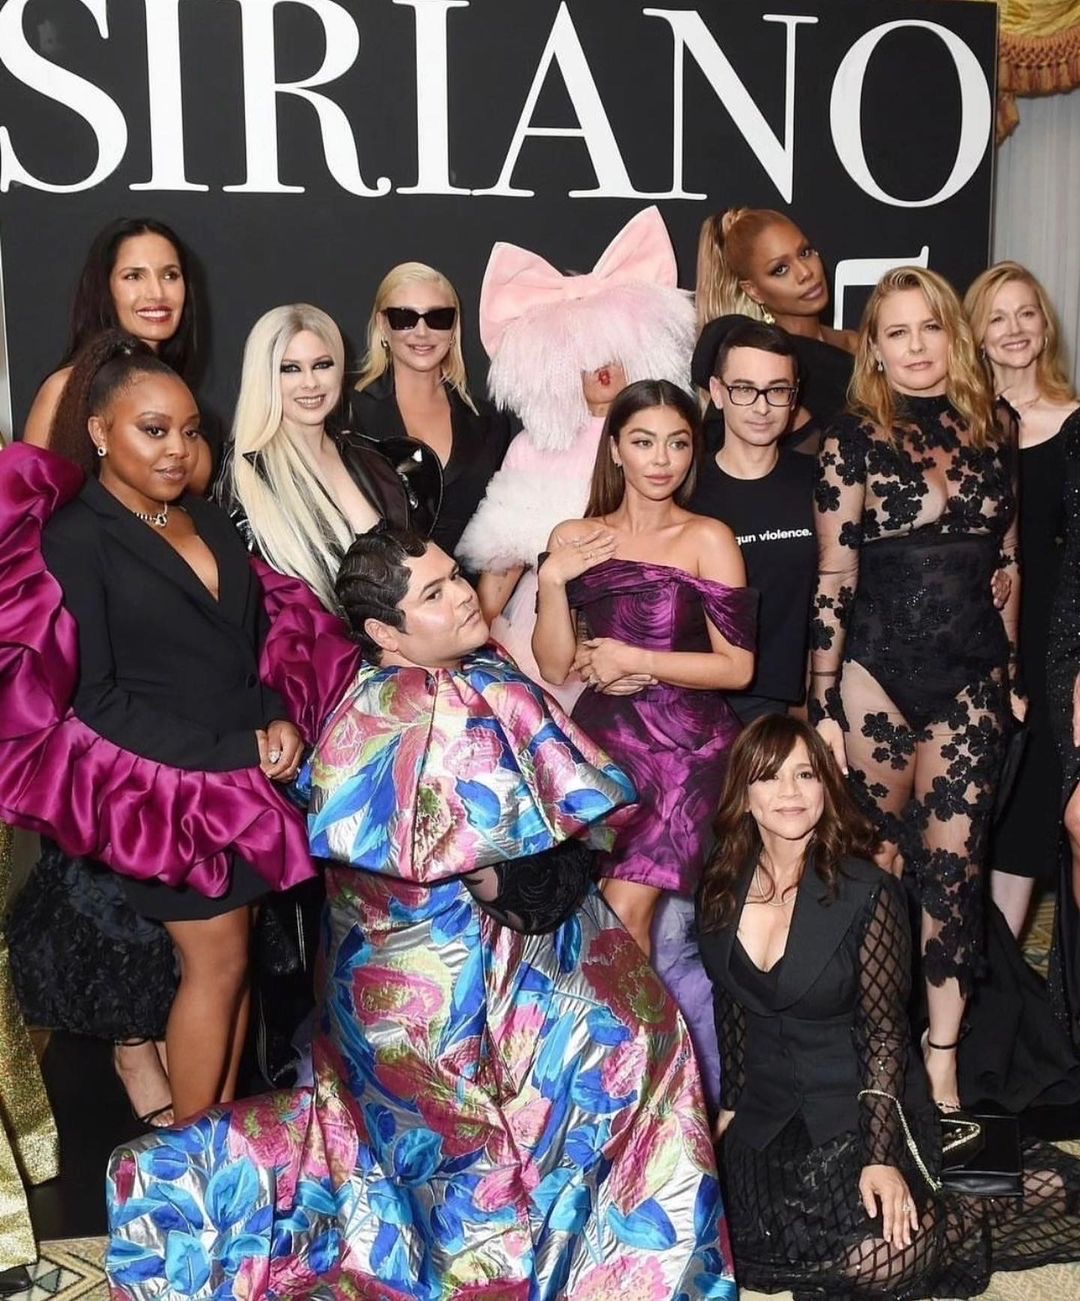 Christian Siriano Celebrated His 15th Anniversary at New York Fashion Week with Bold and Modern Ballerina Silhouette CREW